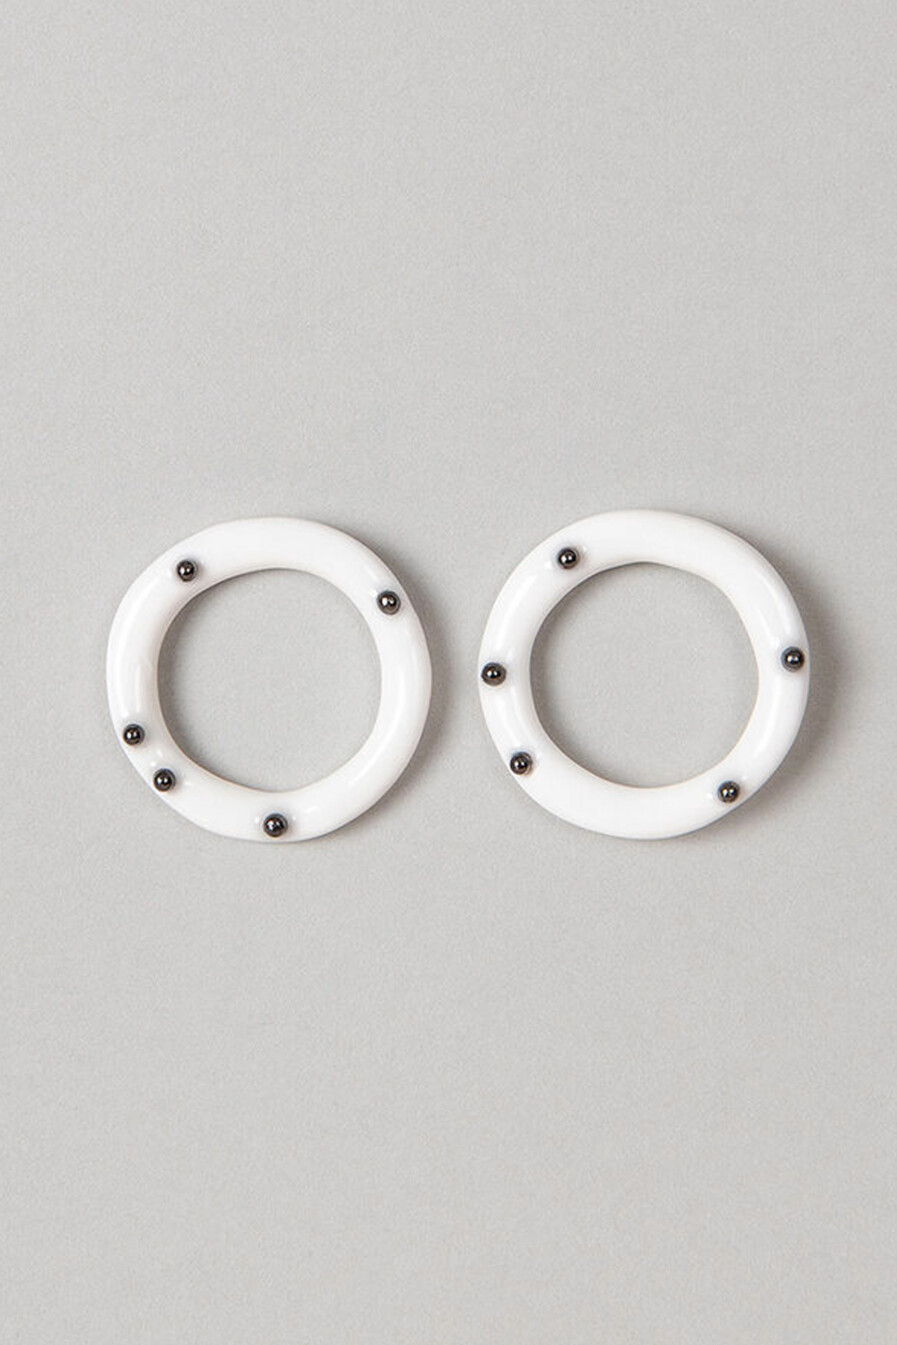 ABE Earrings white circle with black accents